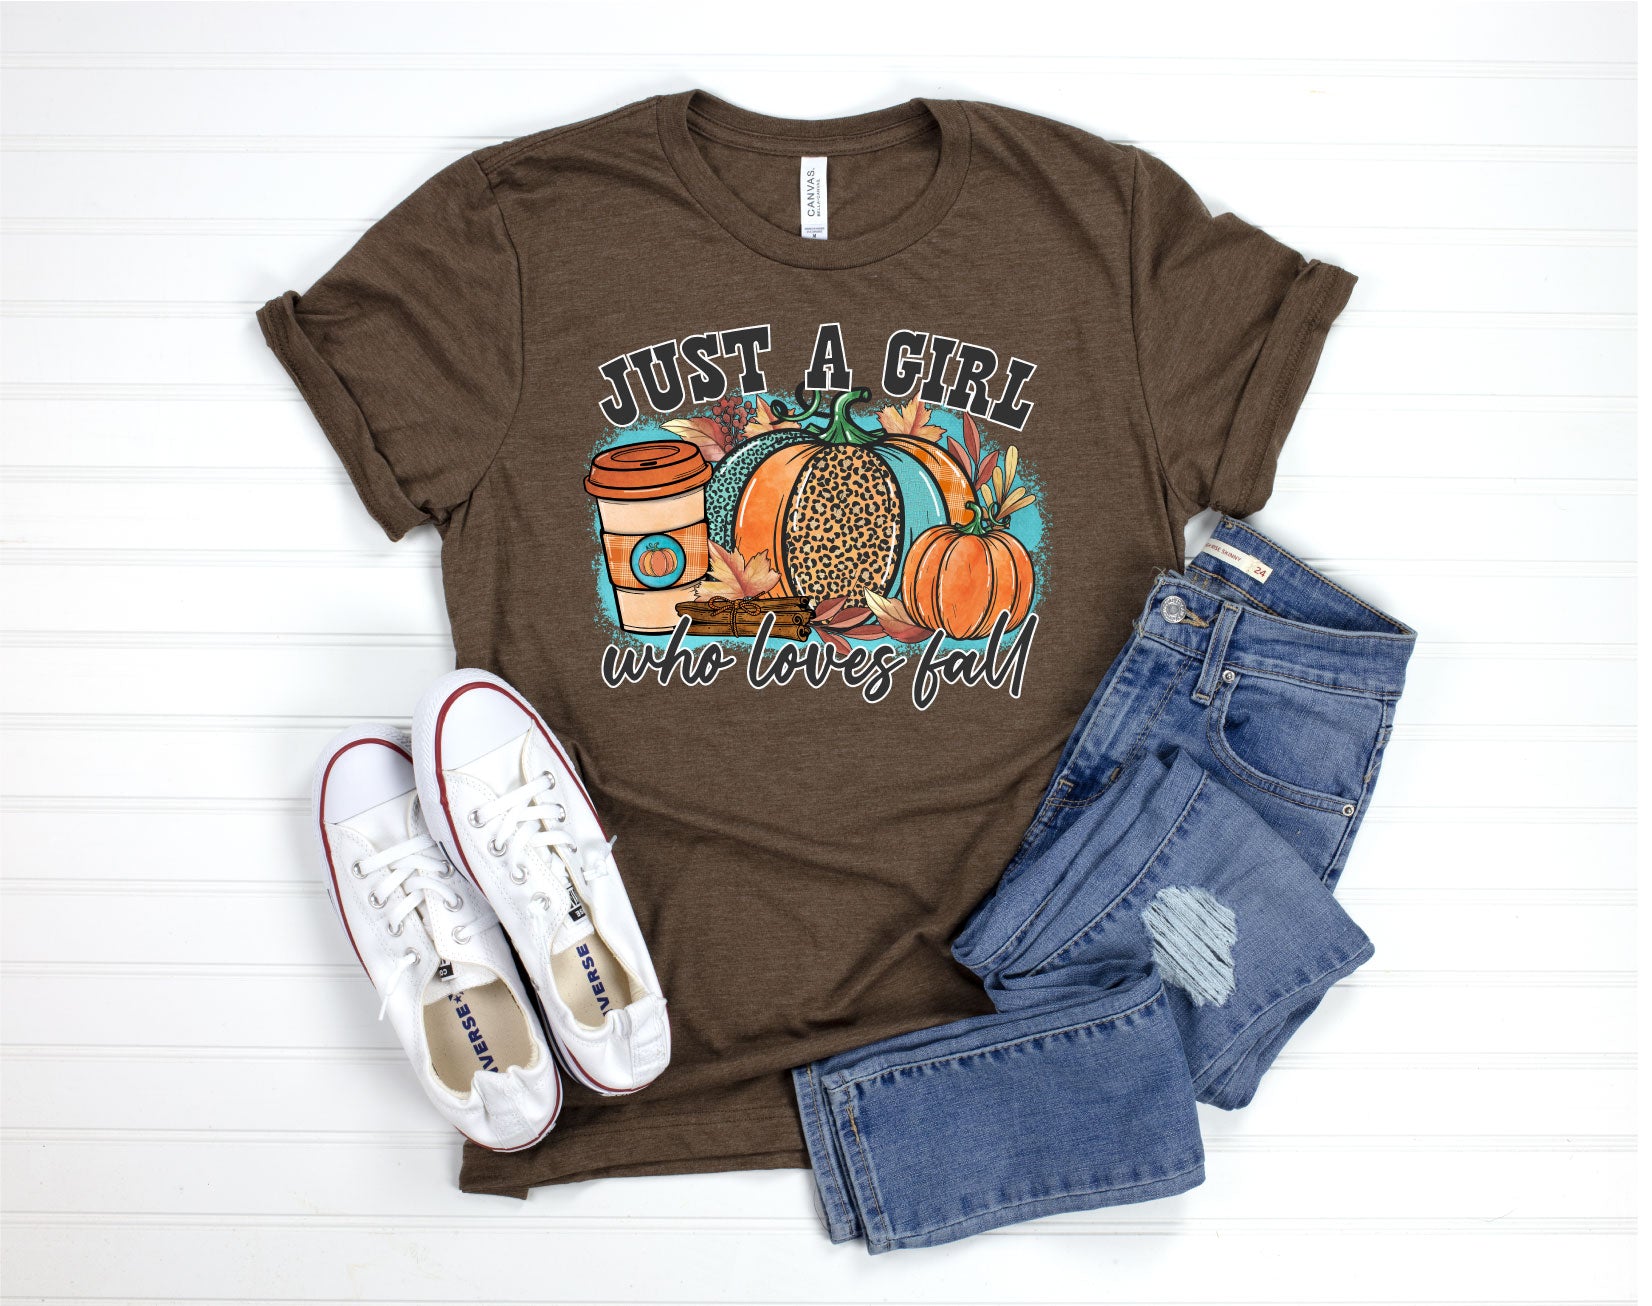 Just a Girl Who Loves Fall Tee - Heather Brown